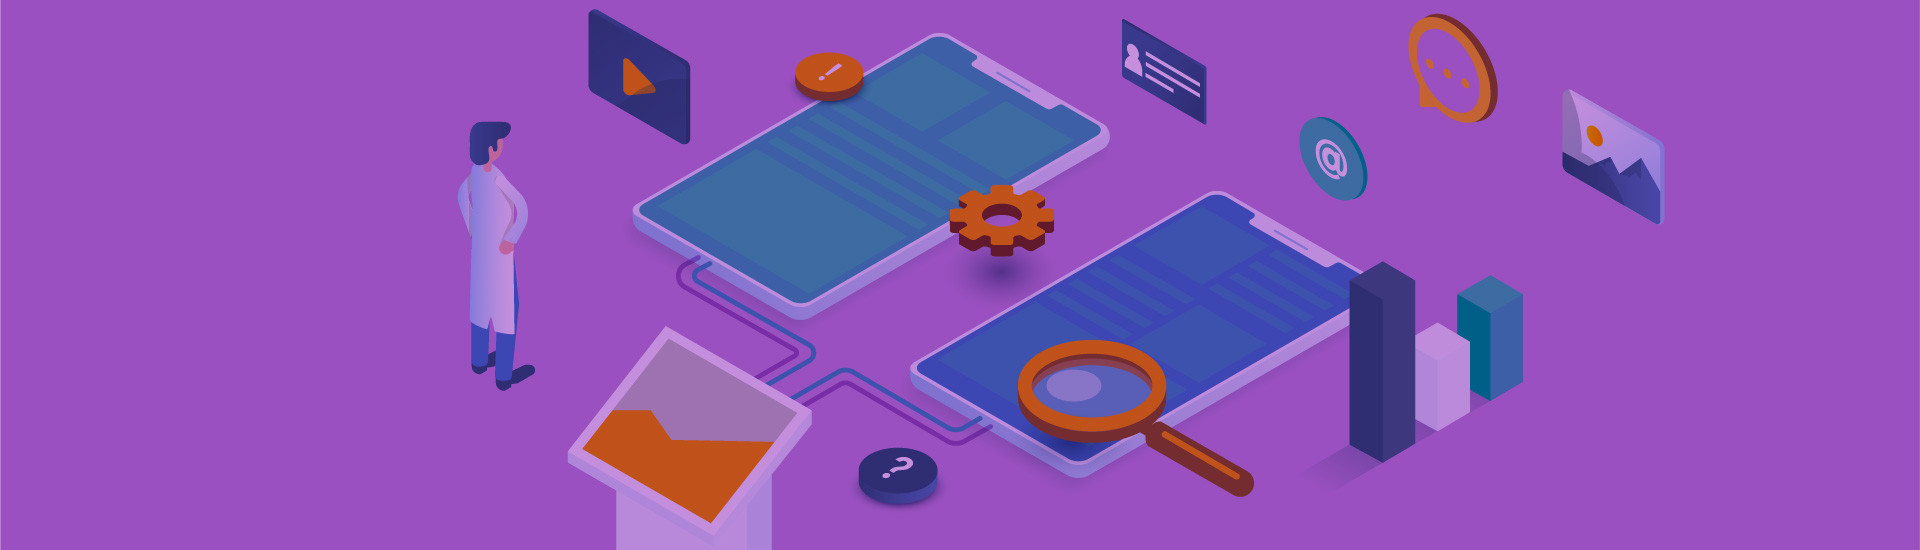 Everything you need to know about mobile app onboarding